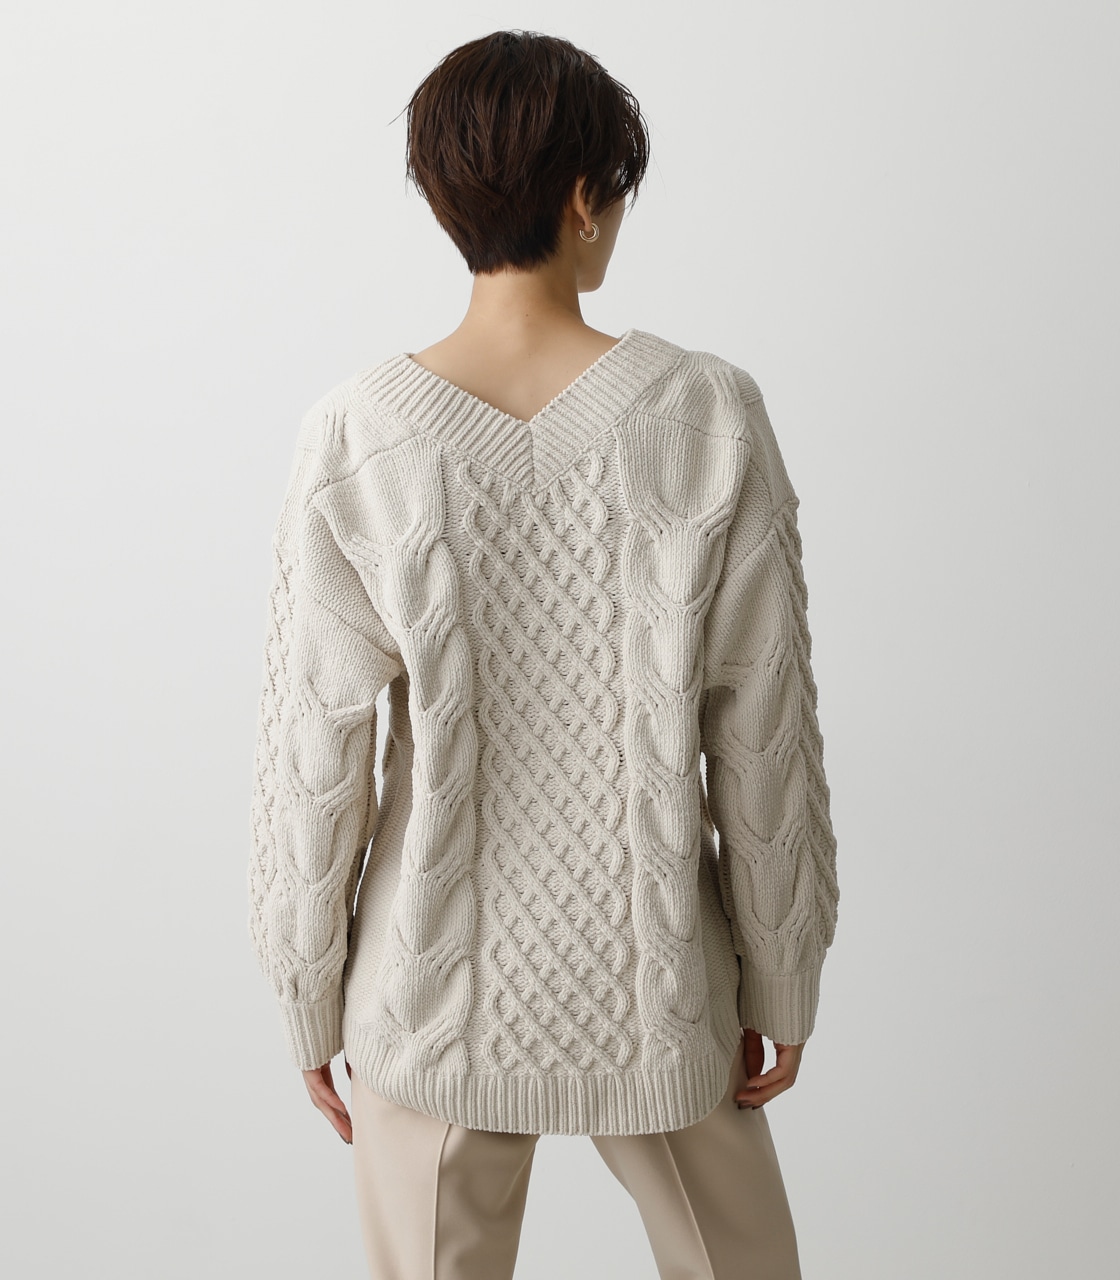 CHENILLE CABLE V/N KNIT TOPS/シェニールケーブルVネックニットトップス 詳細画像 IVOY 7